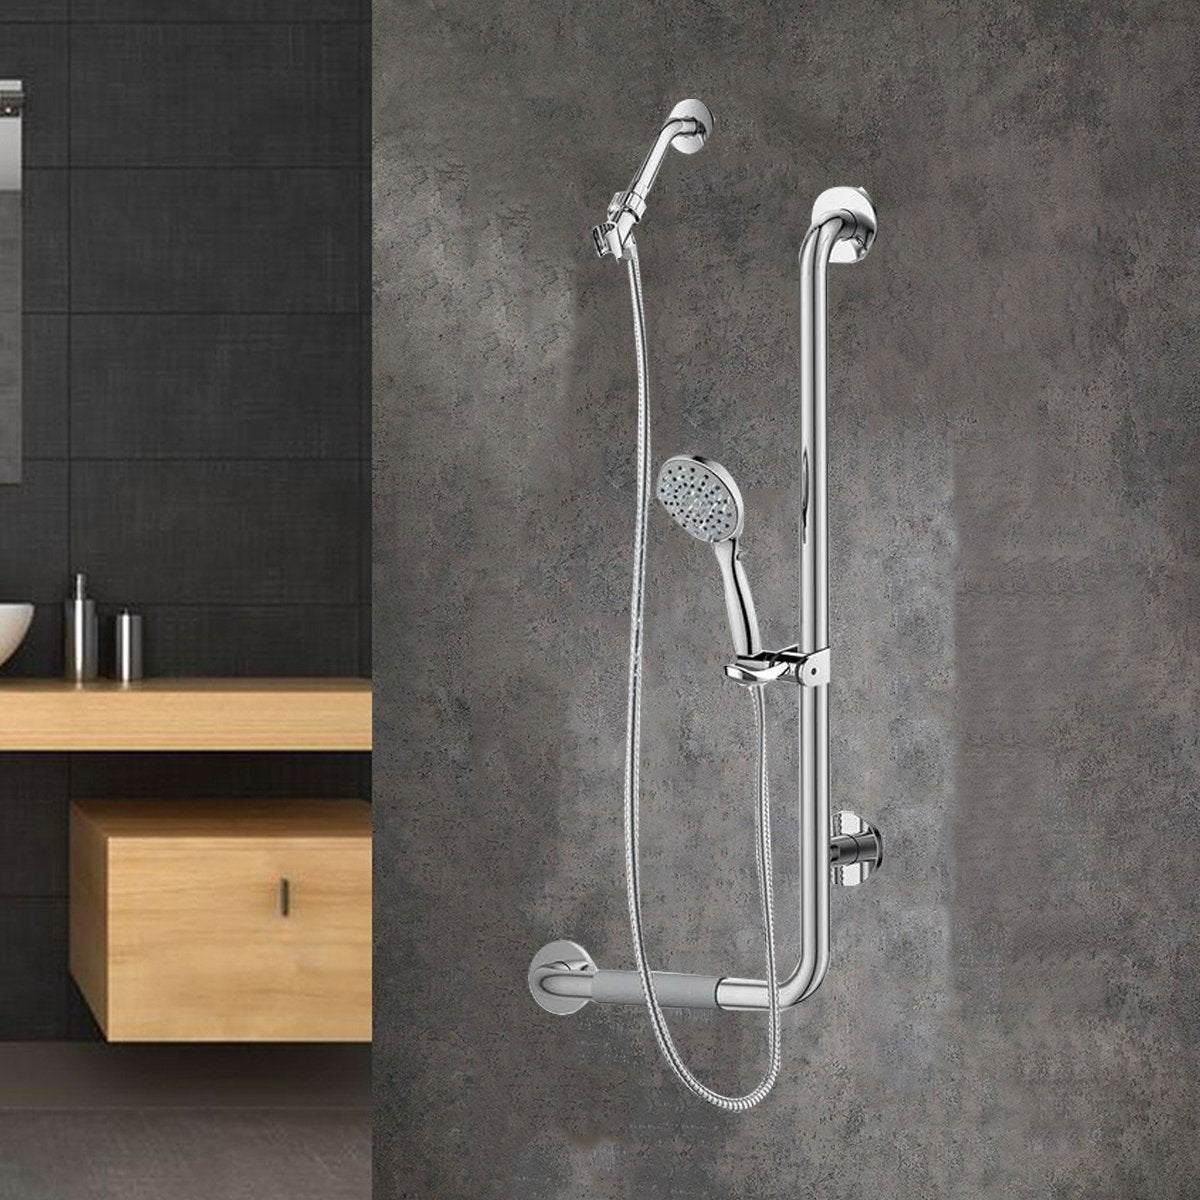 31.5X13.7X3.6 Right-Hand Grip Shower System - Stainless Steel - ADA Compliant - Multi-function Hand Shower